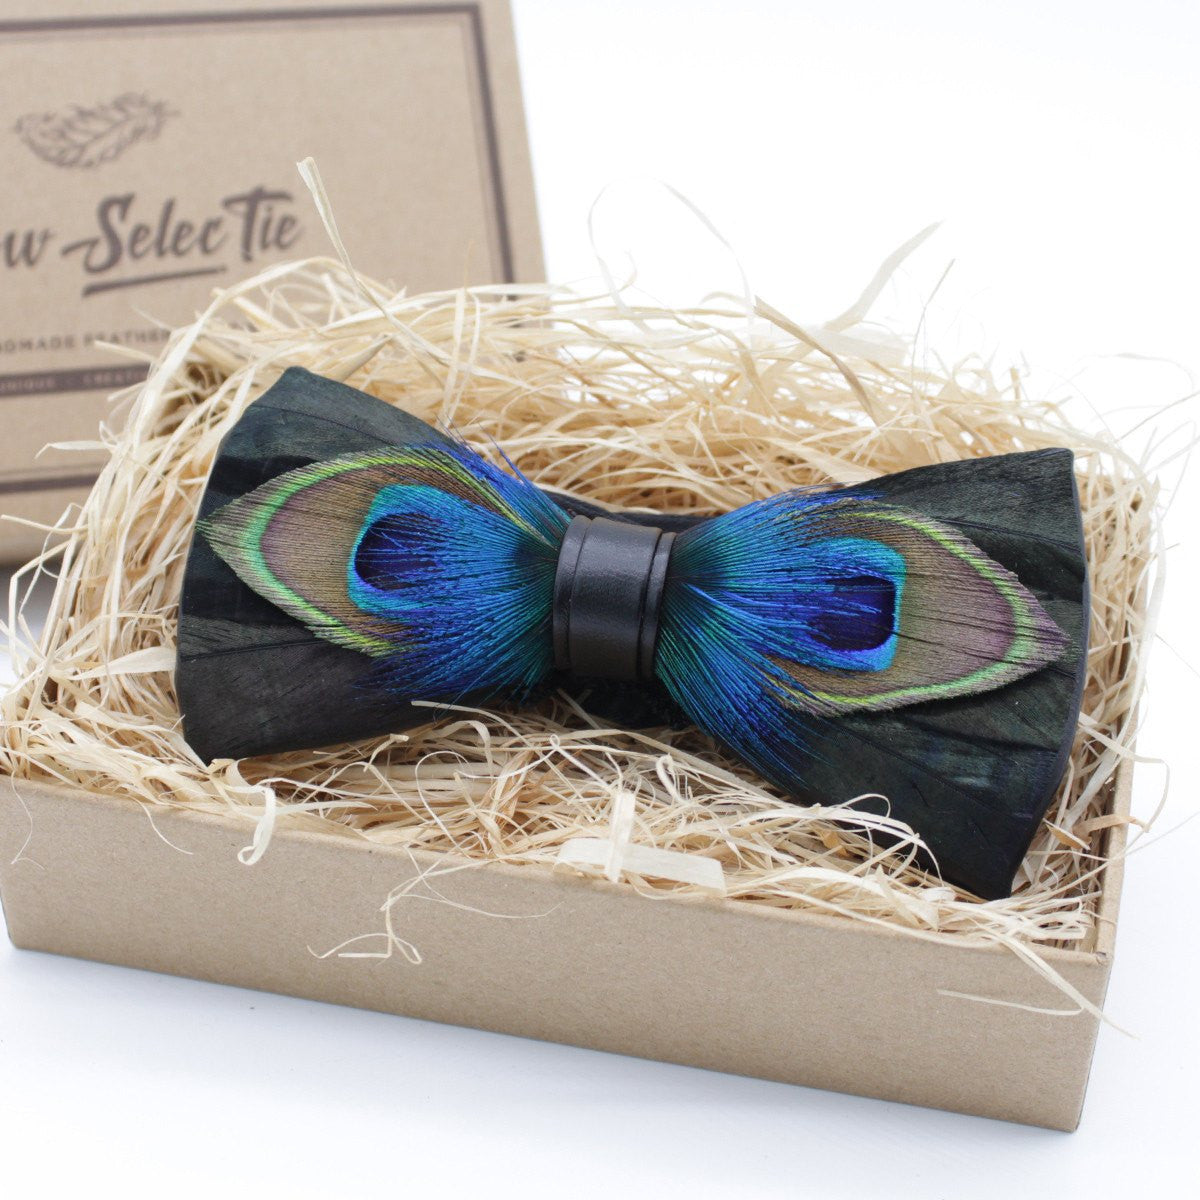 Vibrant Blue Peacock Feather Bow Tie – Bow Ties for Men – Bow SelecTie